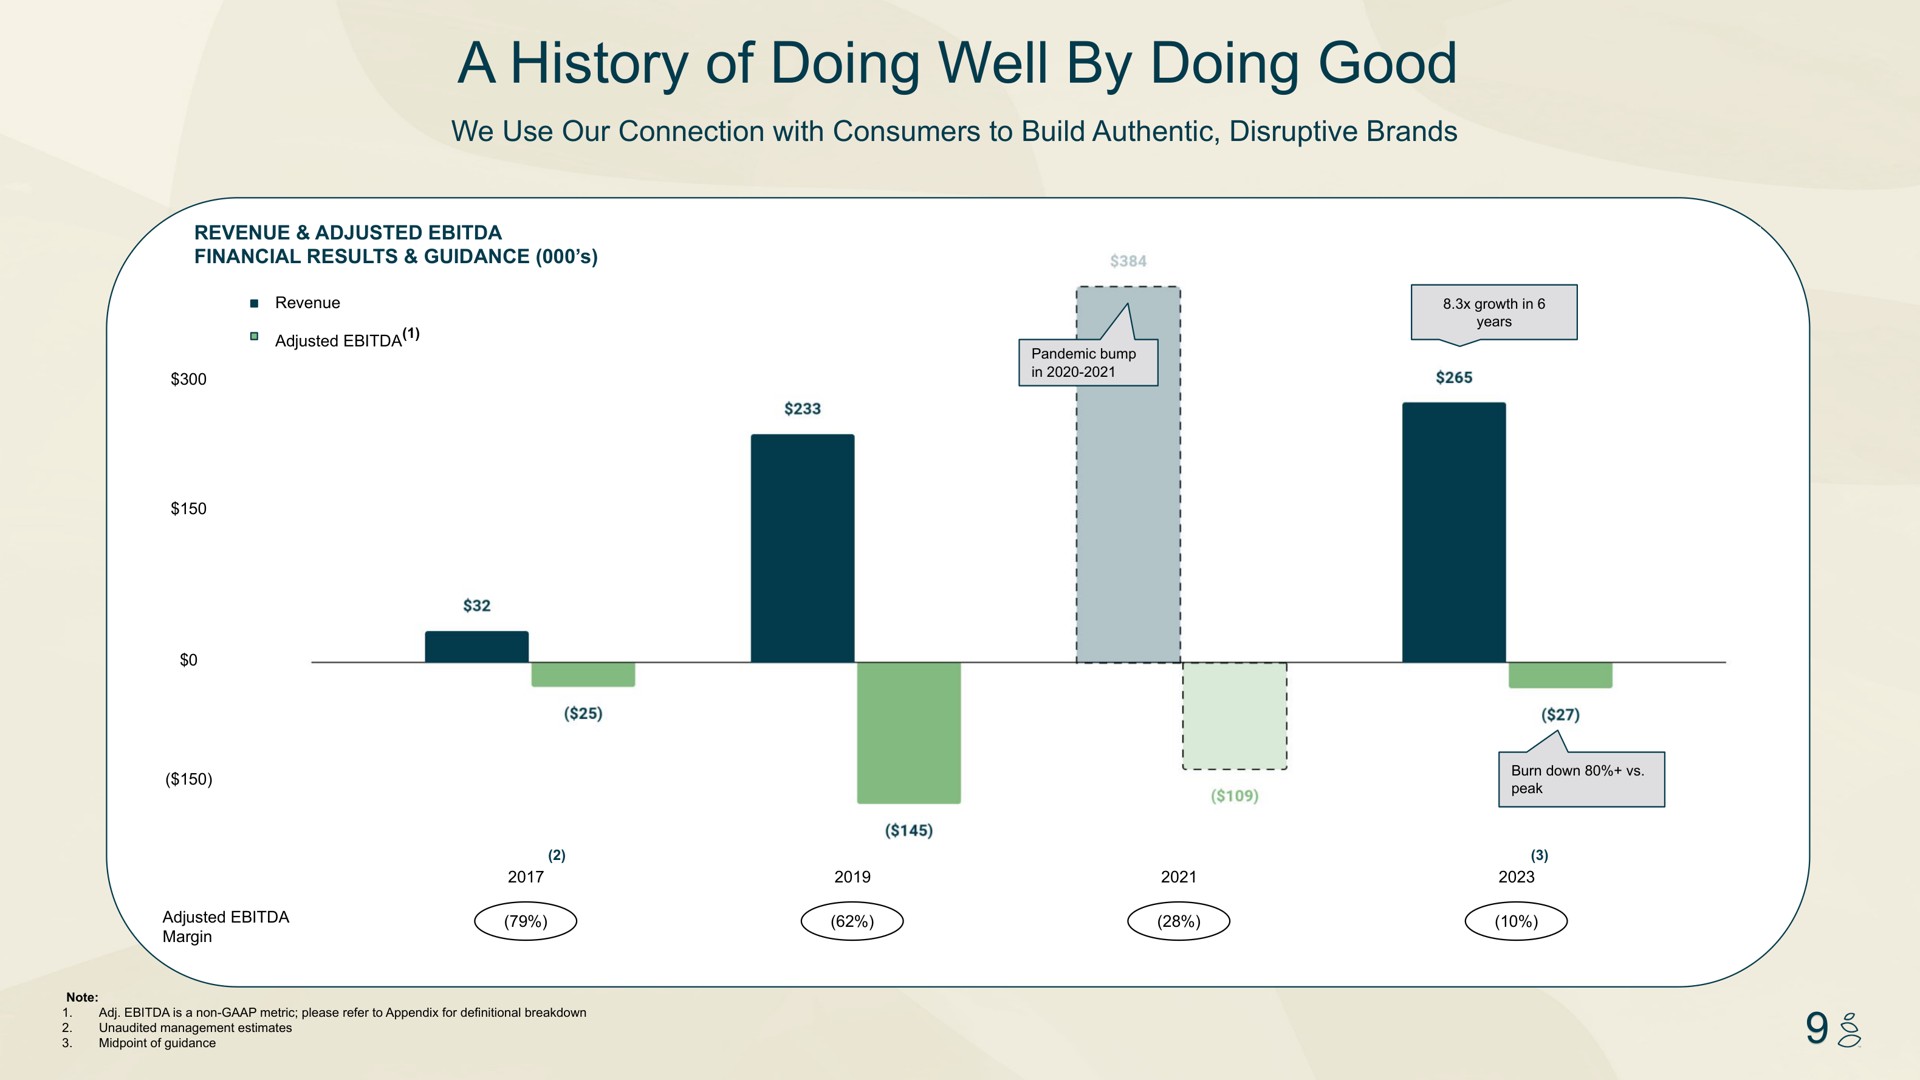 a history of doing well by doing good | Grove